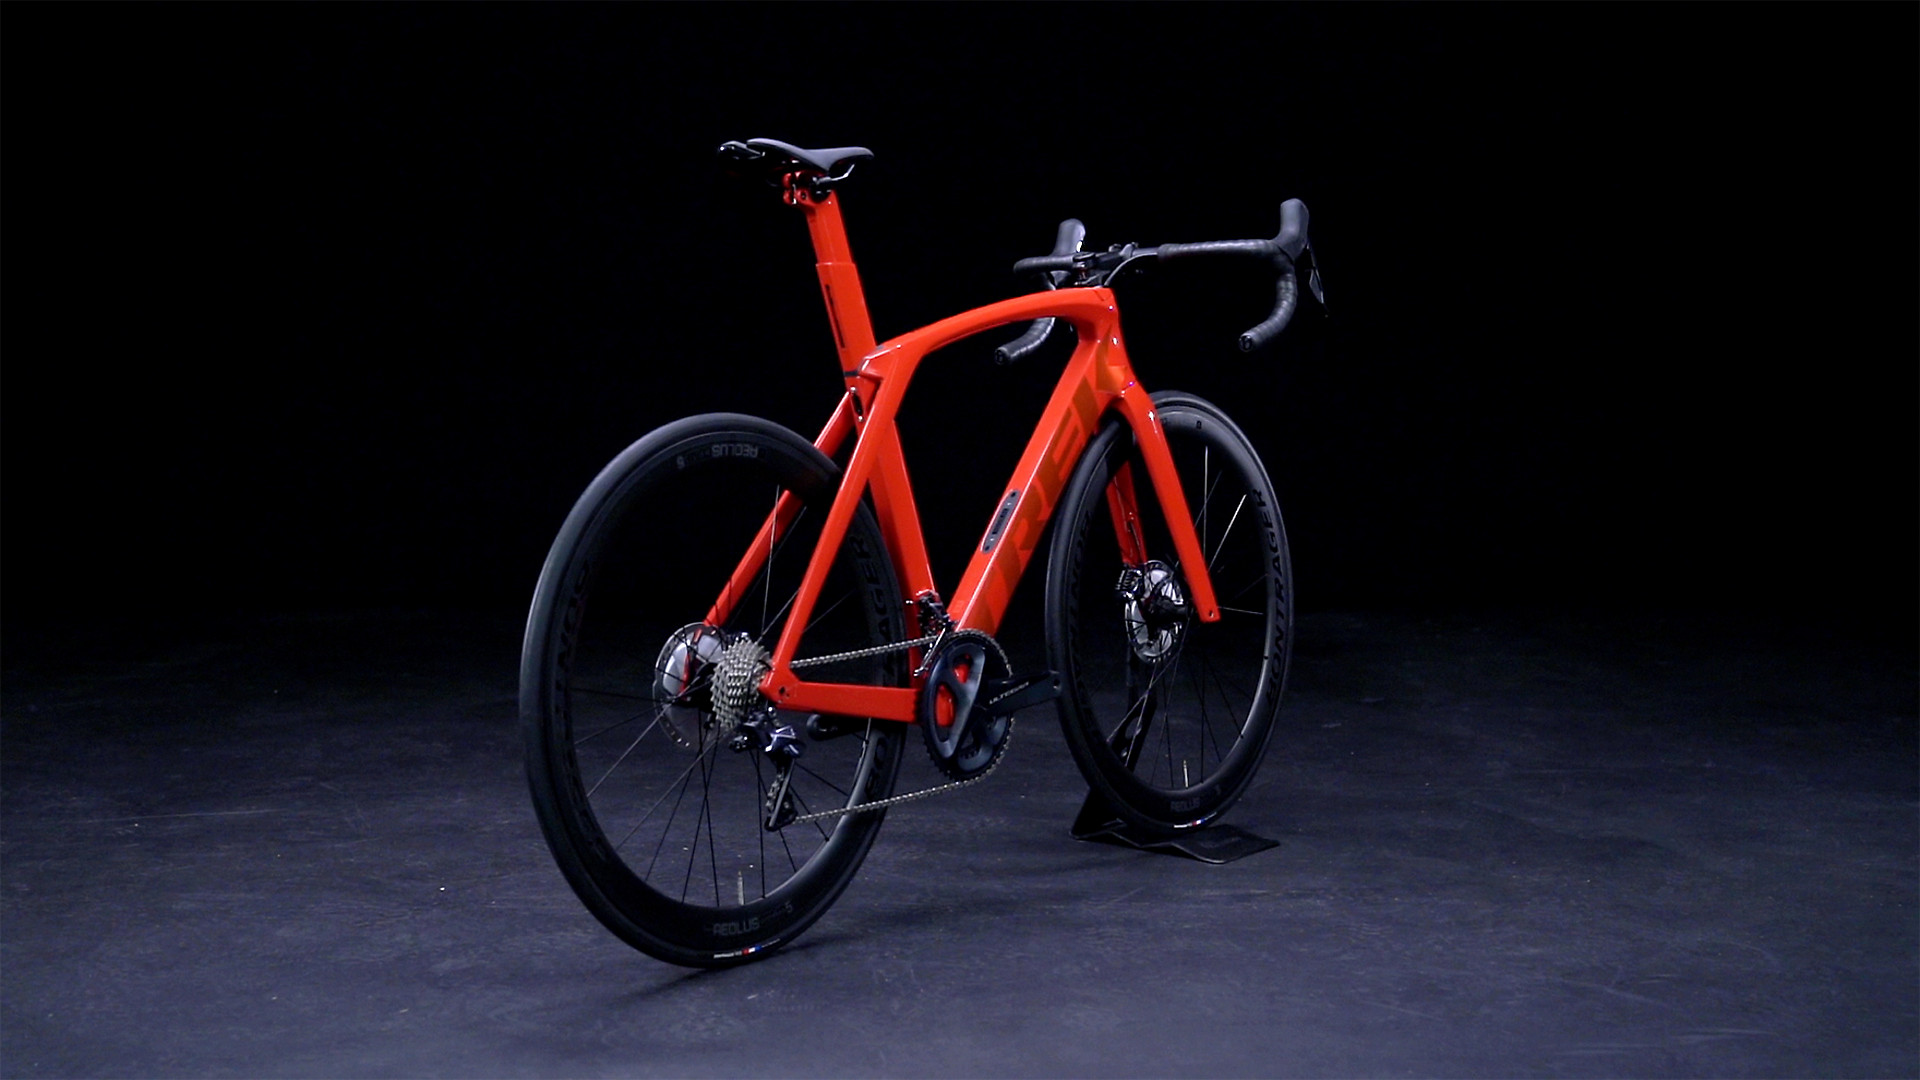 21-002cr_Madone_SL_1760x990?$responsive-pjpg$&cache=on,on&wid=1920&hei=1080&fit=fit,1